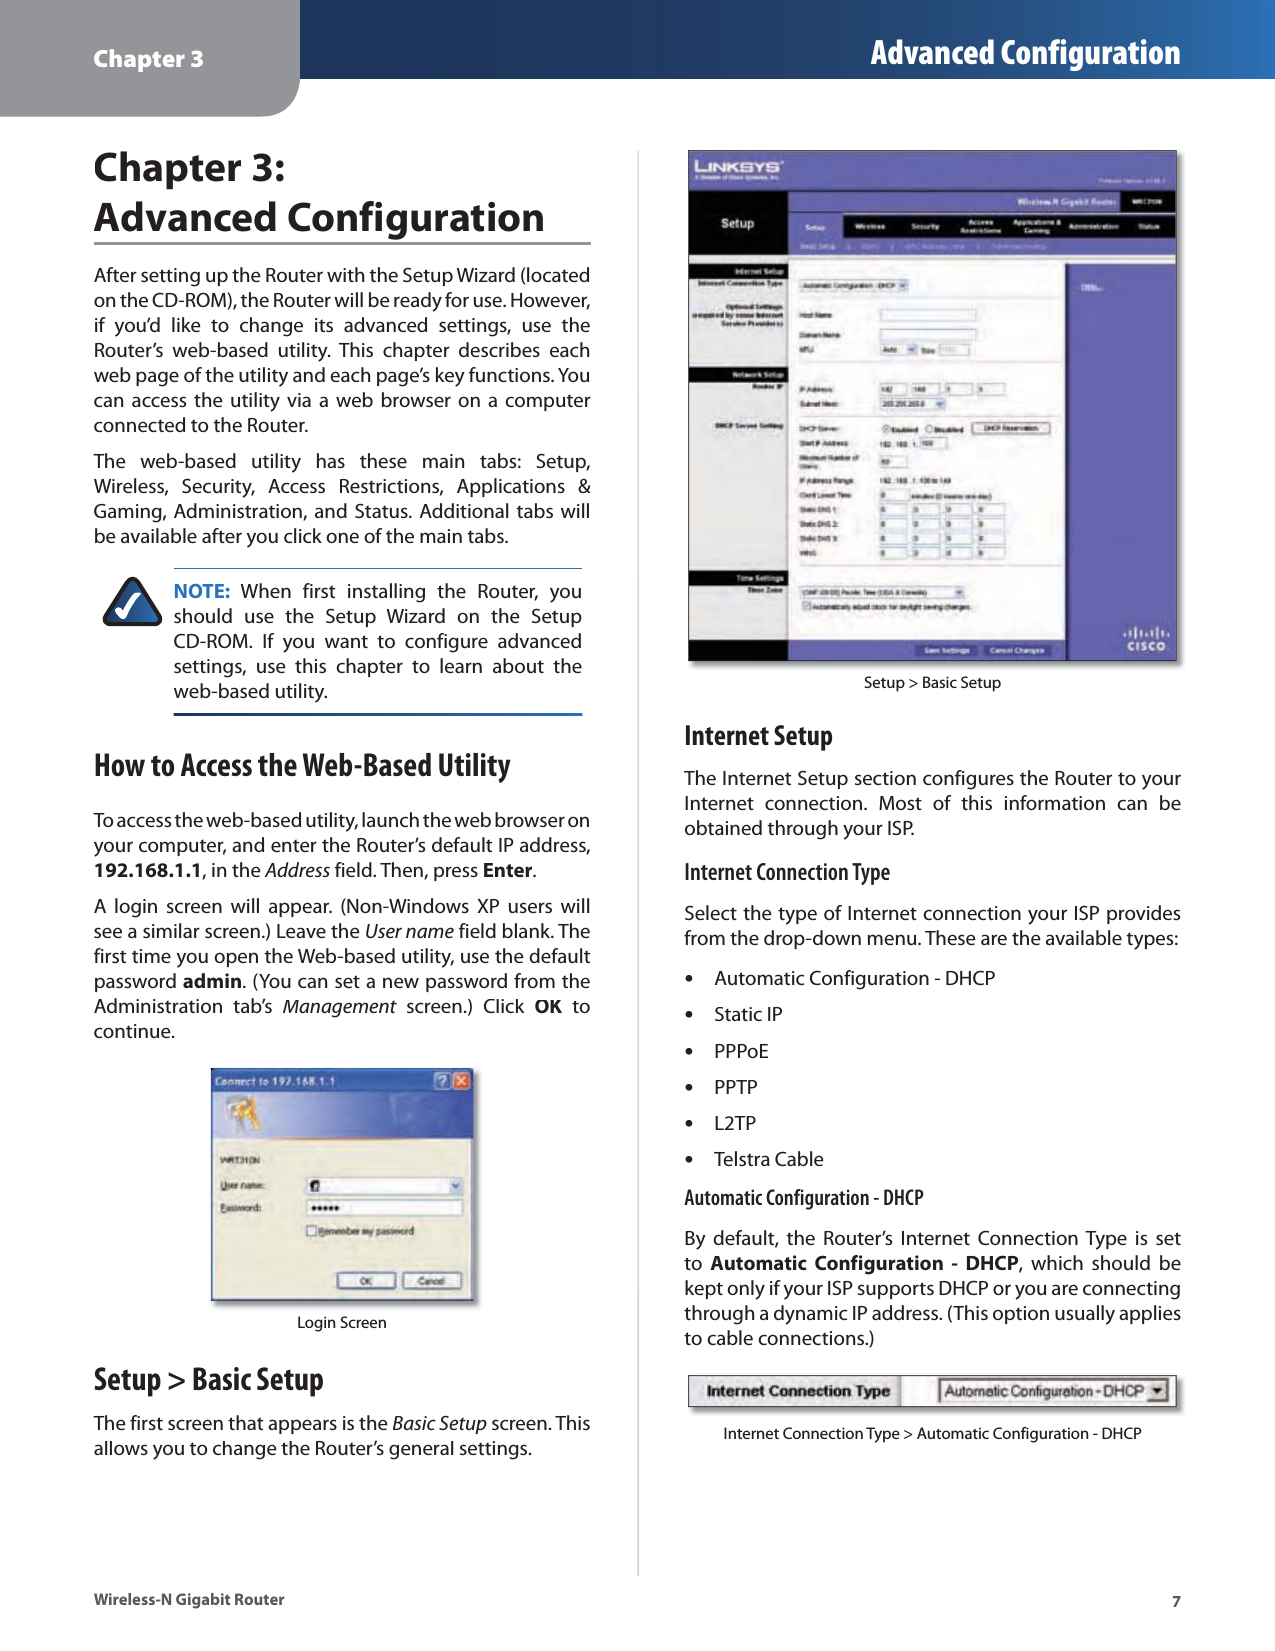 Chapter 3 Advanced Configuration7Wireless-N Gigabit RouterChapter 3:  Advanced ConfigurationAfter setting up the Router with the Setup Wizard (locatedon the CD-ROM), the Router will be ready for use. However,if you’d like to change its advanced settings, use theRouter’s web-based utility. This chapter describes eachweb page of the utility and each page’s key functions. Youcan access the utility via a web browser on a computerconnected to the Router.The web-based utility has these main tabs: Setup,Wireless, Security, Access Restrictions, Applications &amp;Gaming, Administration, and Status. Additional tabs willbe available after you click one of the main tabs.NOTE: When first installing the Router, youshould use the Setup Wizard on the SetupCD-ROM. If you want to configure advancedsettings, use this chapter to learn about theweb-based utility.How to Access the Web-Based UtilityTo access the web-based utility, launch the web browser onyour computer, and enter the Router’s default IP address,192.168.1.1, in the Addressfield. Then, pressEnter.A login screen will appear. (Non-Windows XP users willsee a similar screen.) Leave theUser name field blank. Thefirst time you open the Web-based utility, use the defaultpasswordadmin. (You can set a new password from theAdministration tab’sManagementscreen.) Click tOKto Kcontinue.Login ScreenSetup &gt; Basic SetupThe first screen that appears is theBasic Setup screen. Thisallows you to change the Router’s general settings.Setup &gt; Basic SetupInternet SetupThe Internet Setup section configures the Router to yourInternet connection. Most of this information can beobtained through your ISP.Internet Connection TypeSelect the type of Internet connection your ISP providesfrom the drop-down menu. These are the available types:Automatic Configuration - DHCPsStatic IPsPPPoEsPPTPsL2TPsTelstra CablesAutomatic Configuration - DHCPBy default, the Router’s Internet Connection Type is settoAutomatic Configuration - DHCP, which should bekept only if your ISP supports DHCP or you are connectingthrough a dynamic IP address. (This option usually appliesto cable connections.)Internet Connection Type &gt; Automatic Configuration - DHCP